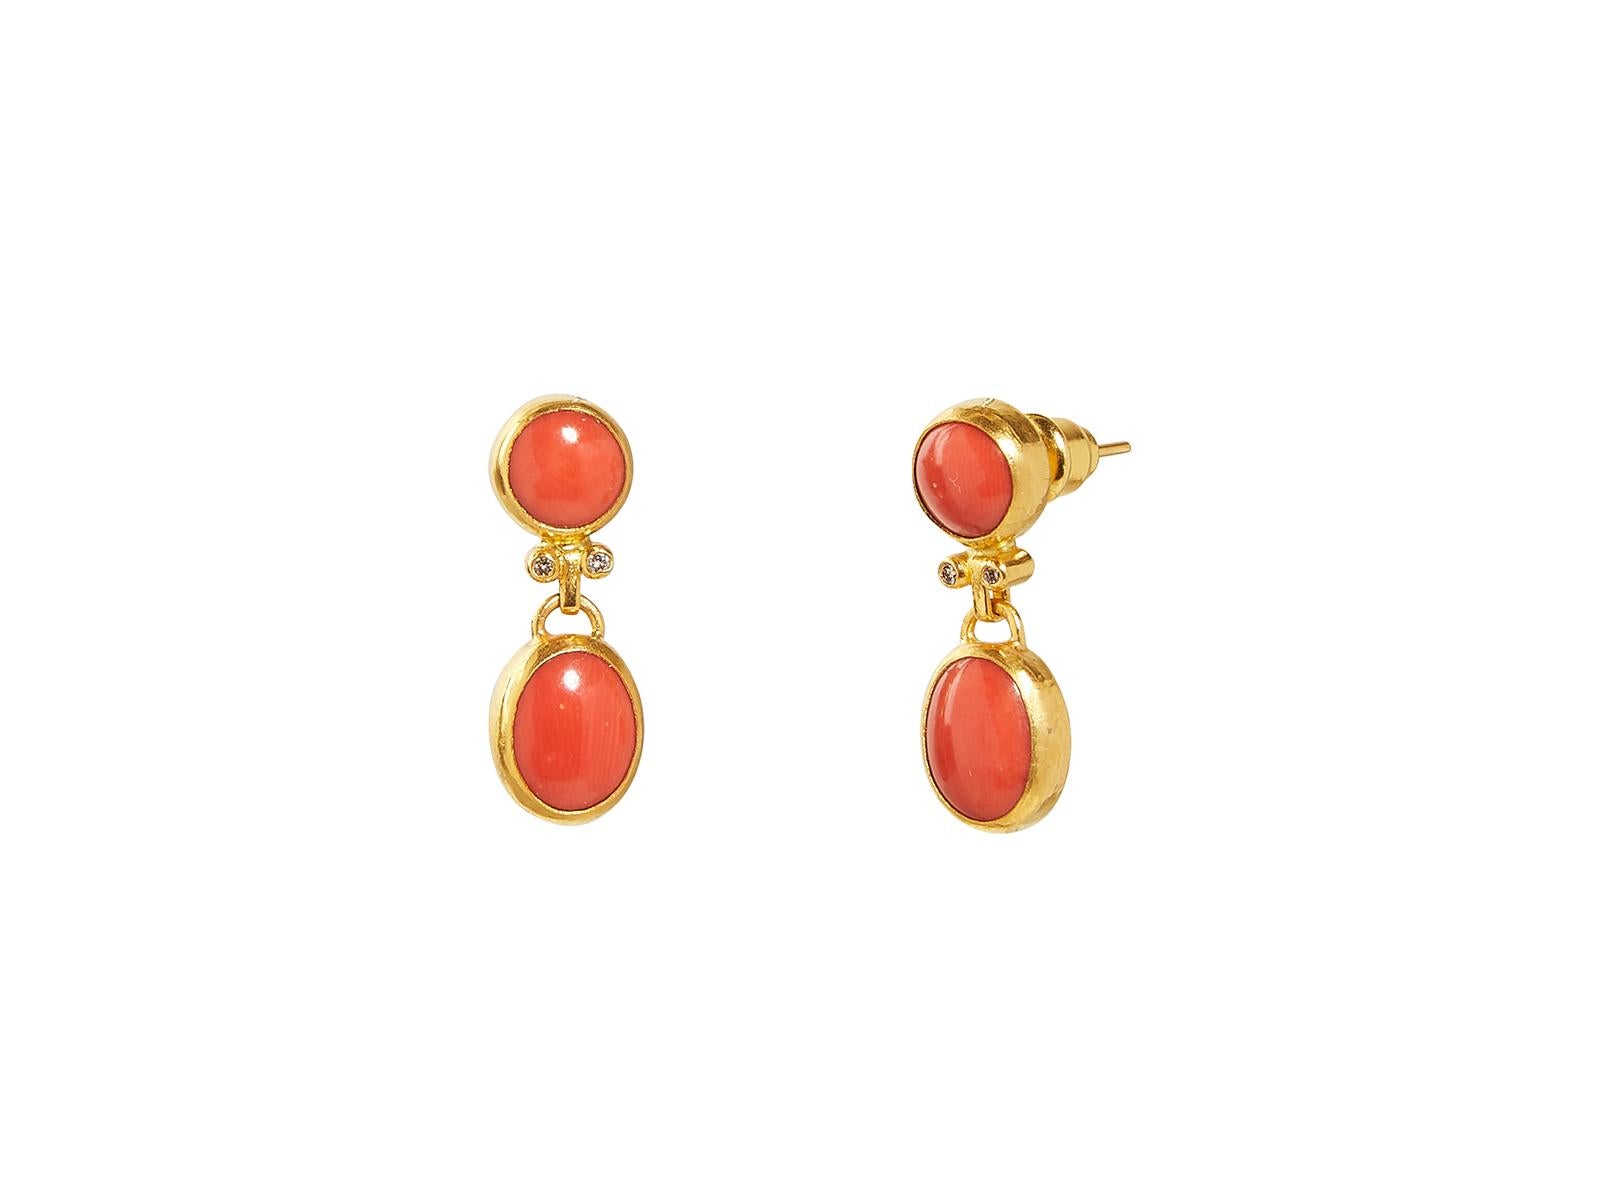 One-of-a-Kind Gold Drop Earrings, from the Rune Collection, Orange Oval Cabochon Coral and Diamonds 0.072ct 1 inch

“The unique quality of stones inspires my one of a kind creations. When I select a stone I usually have a vision of how I will build